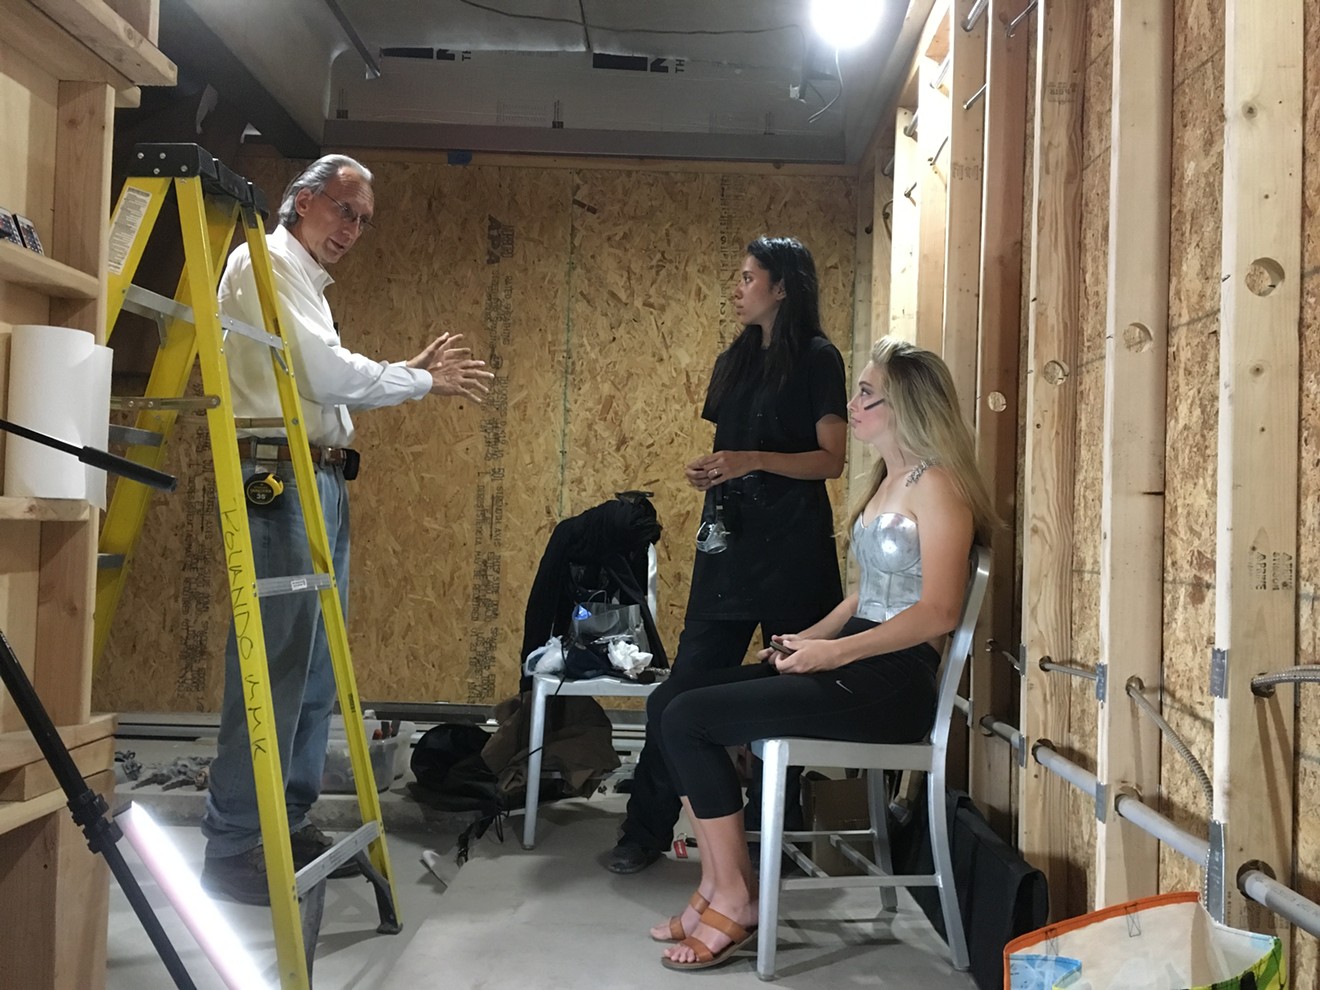 Local artist and accused serial harasser Bill Tonnesen talking with former employee Marrioth Alfonzo (center), the new manager of The Imaginarea, which opens Friday in the art space formerly known as The Lavatory.